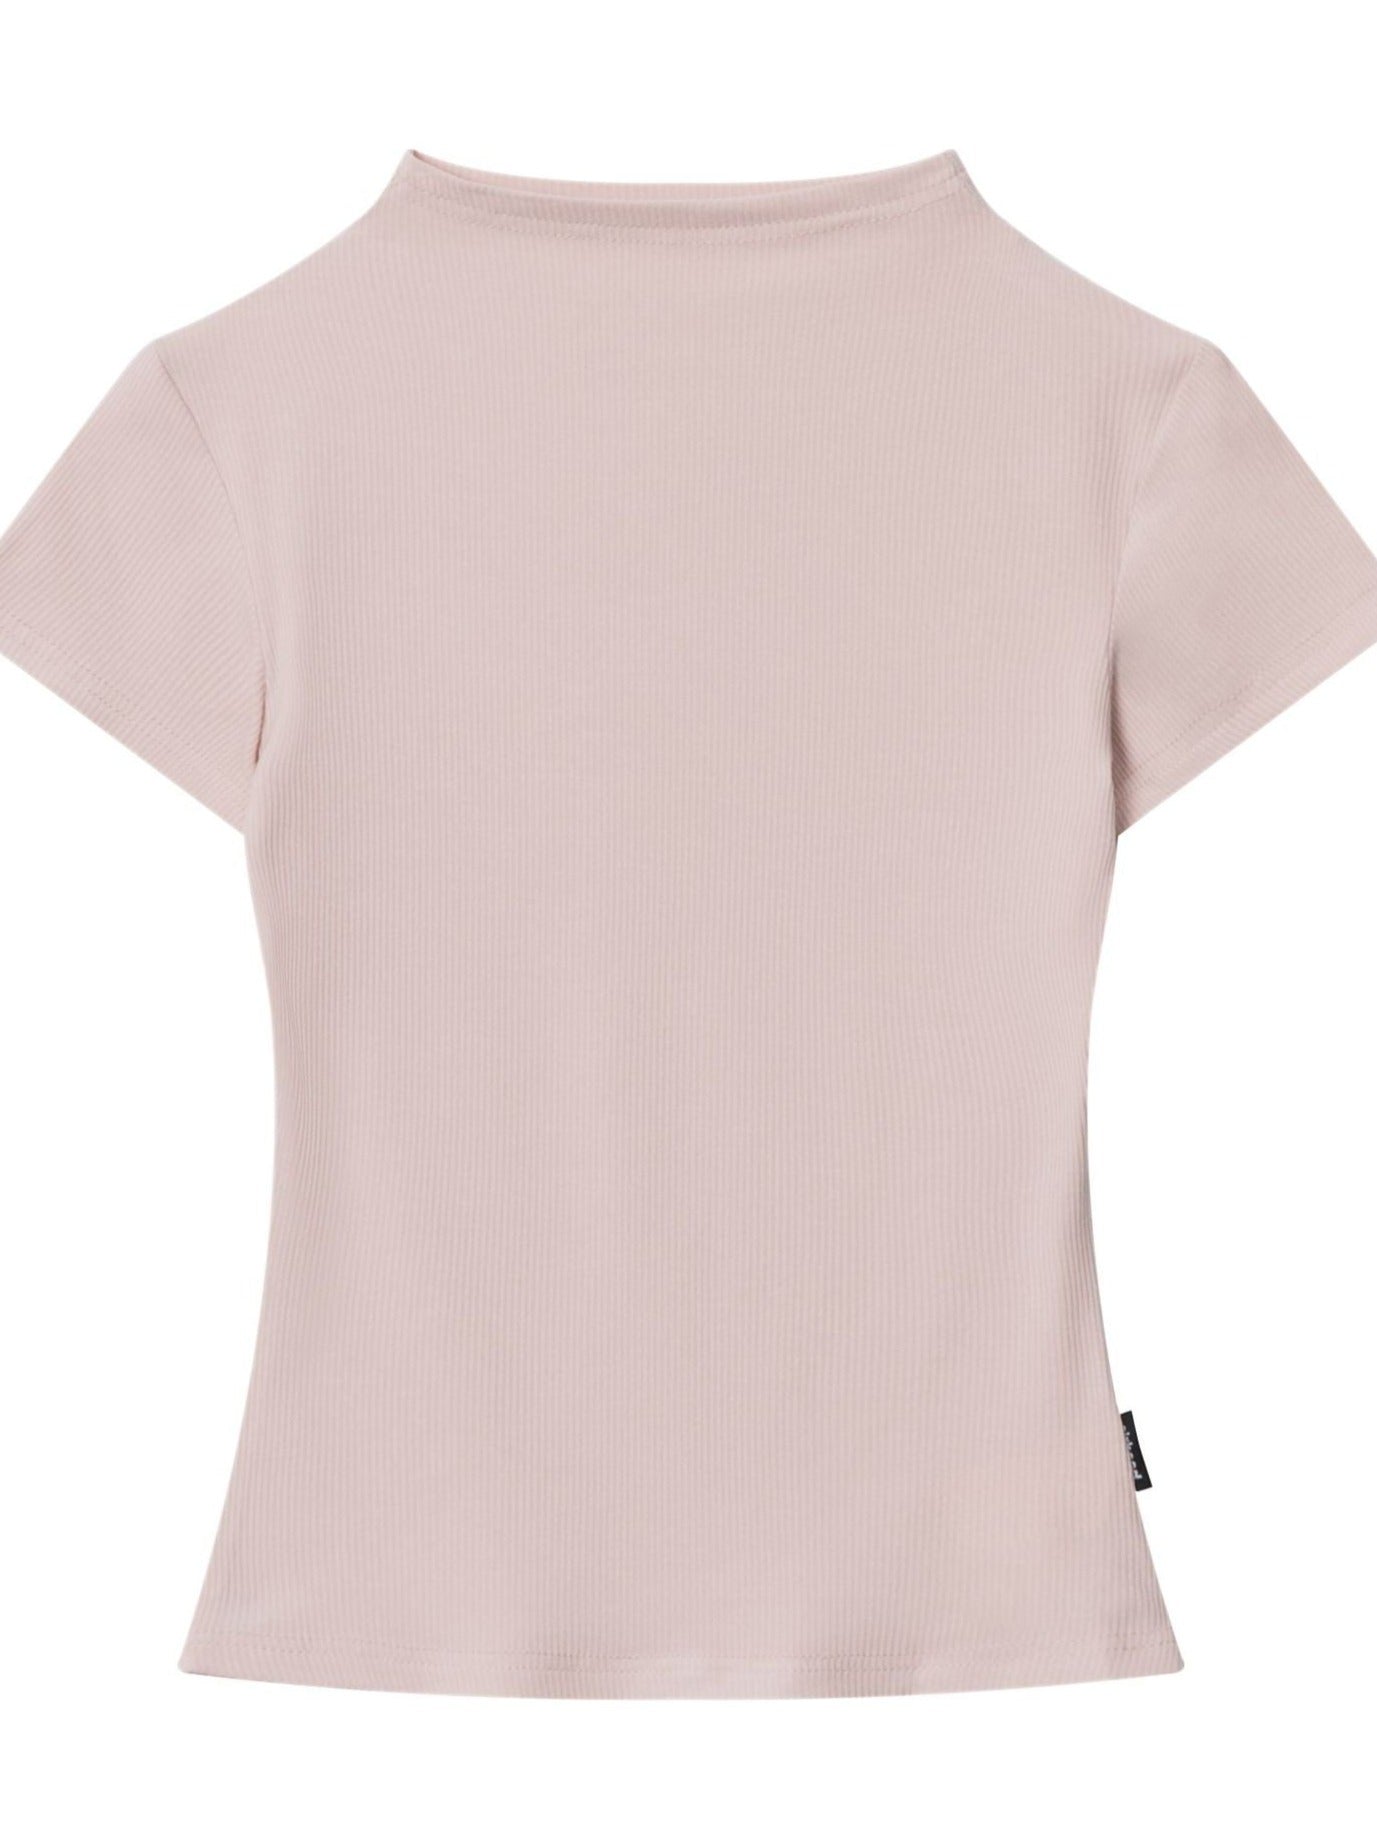 Slim Fit Round Neck Short-Sleeved Sexy Top